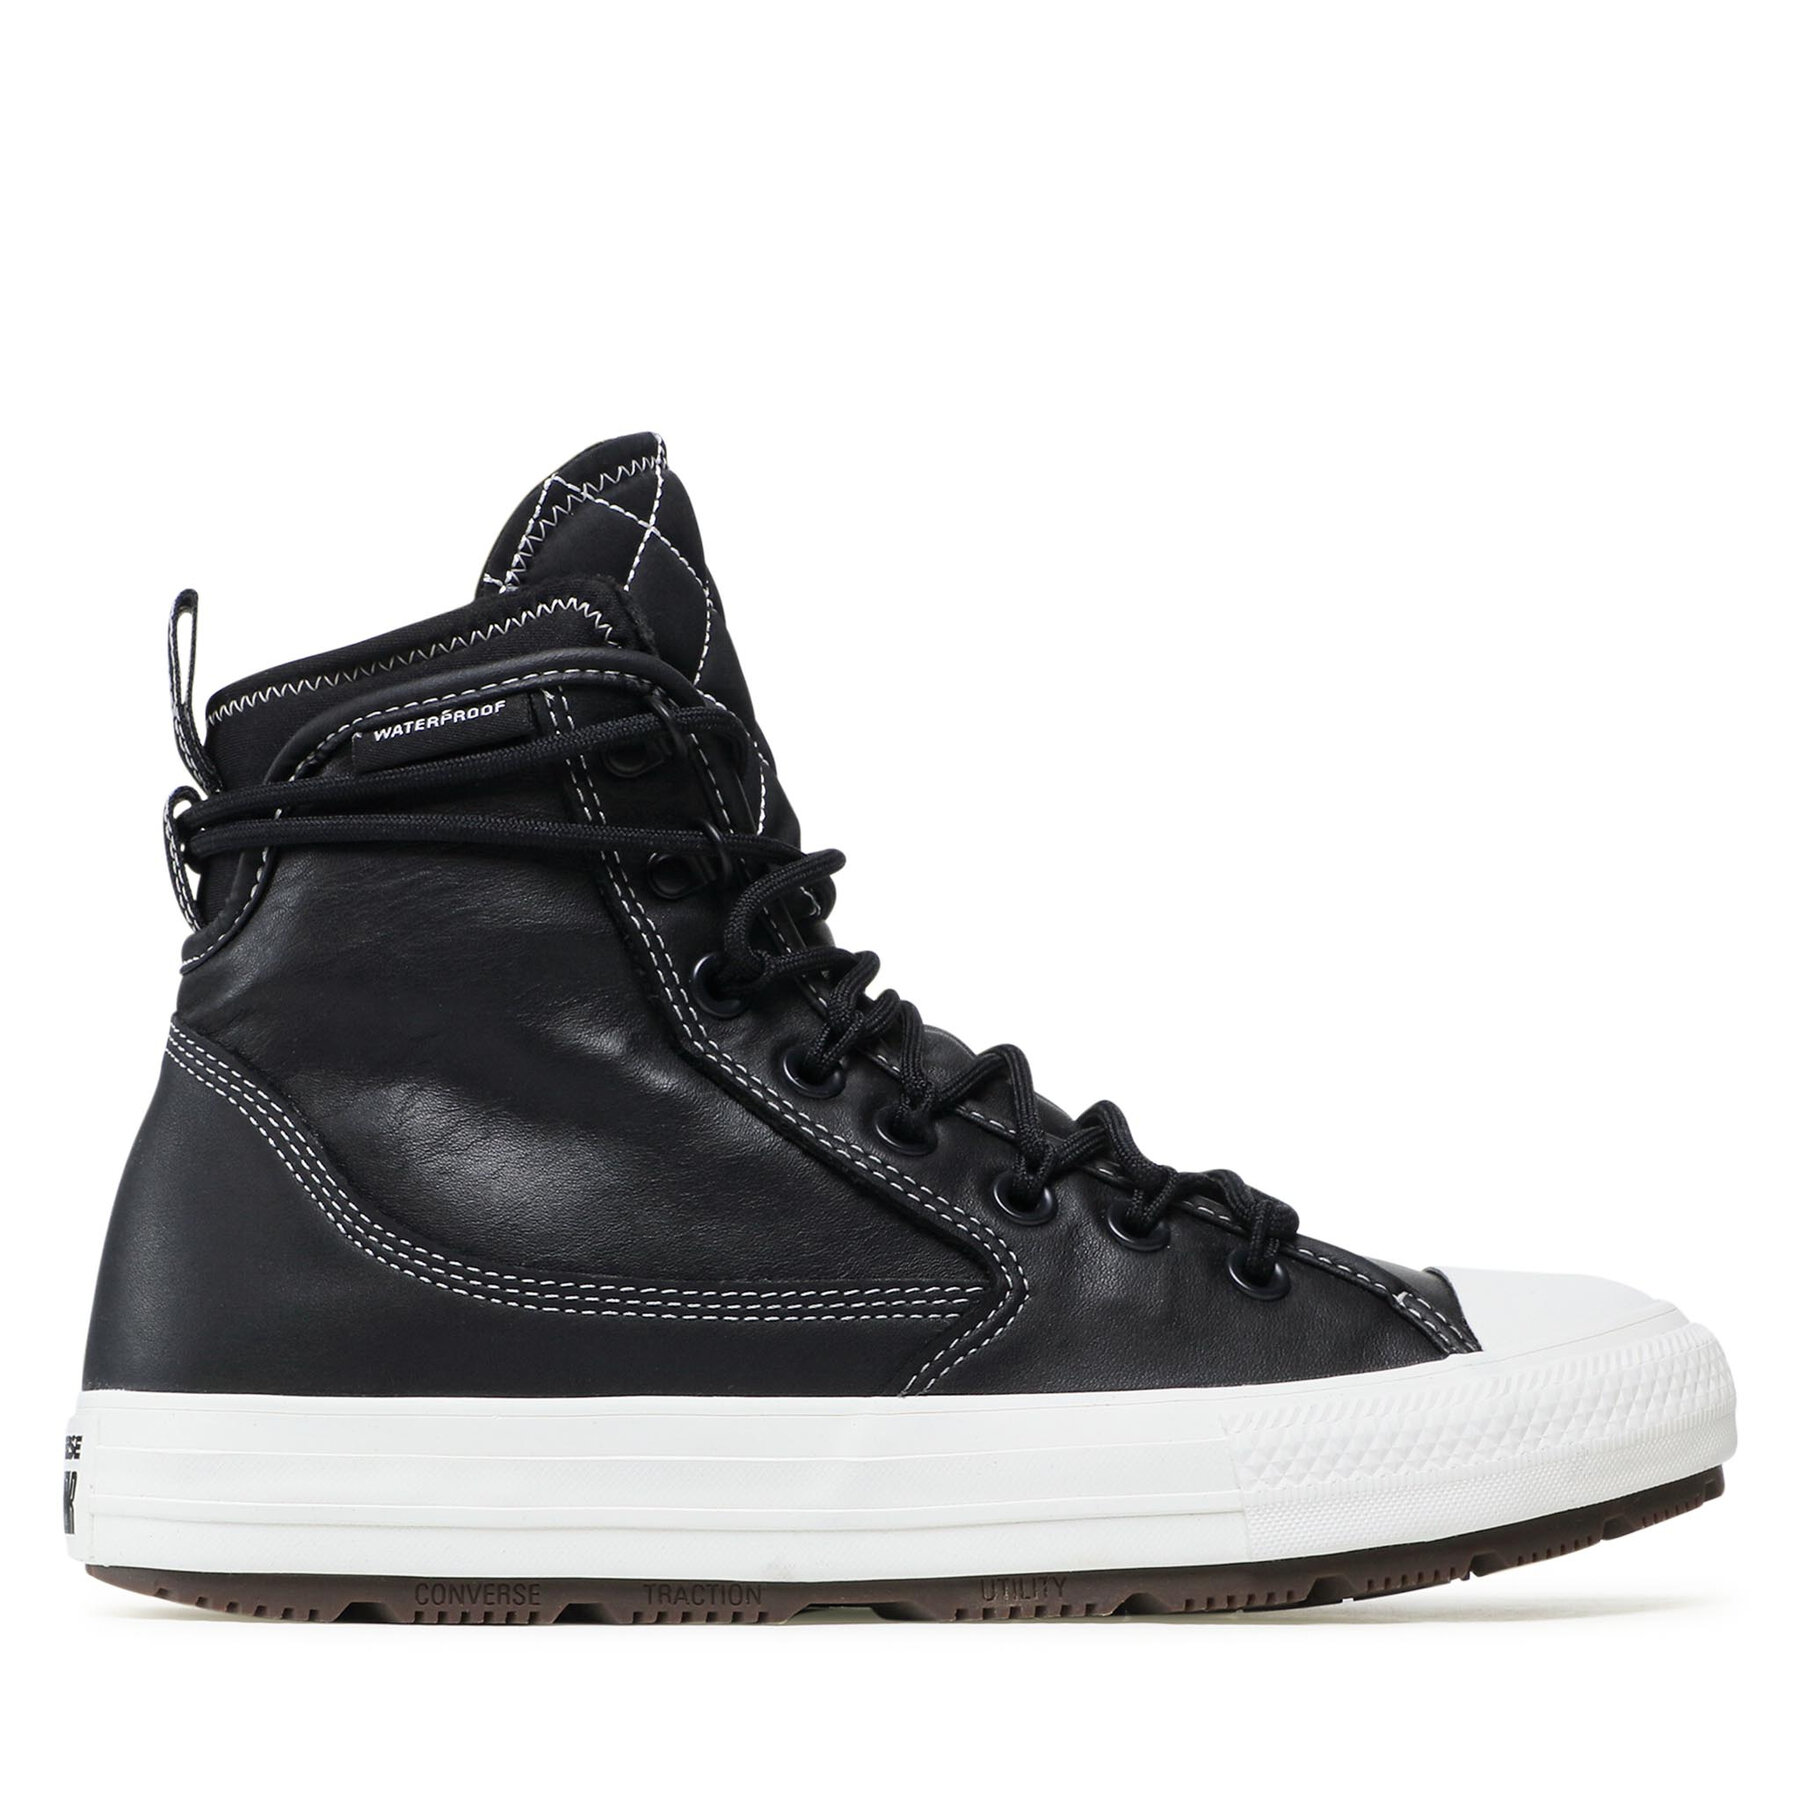 Converse Chuck Taylor All Star All Terrain Counter Climate High Top black/black/egret - Sneakers